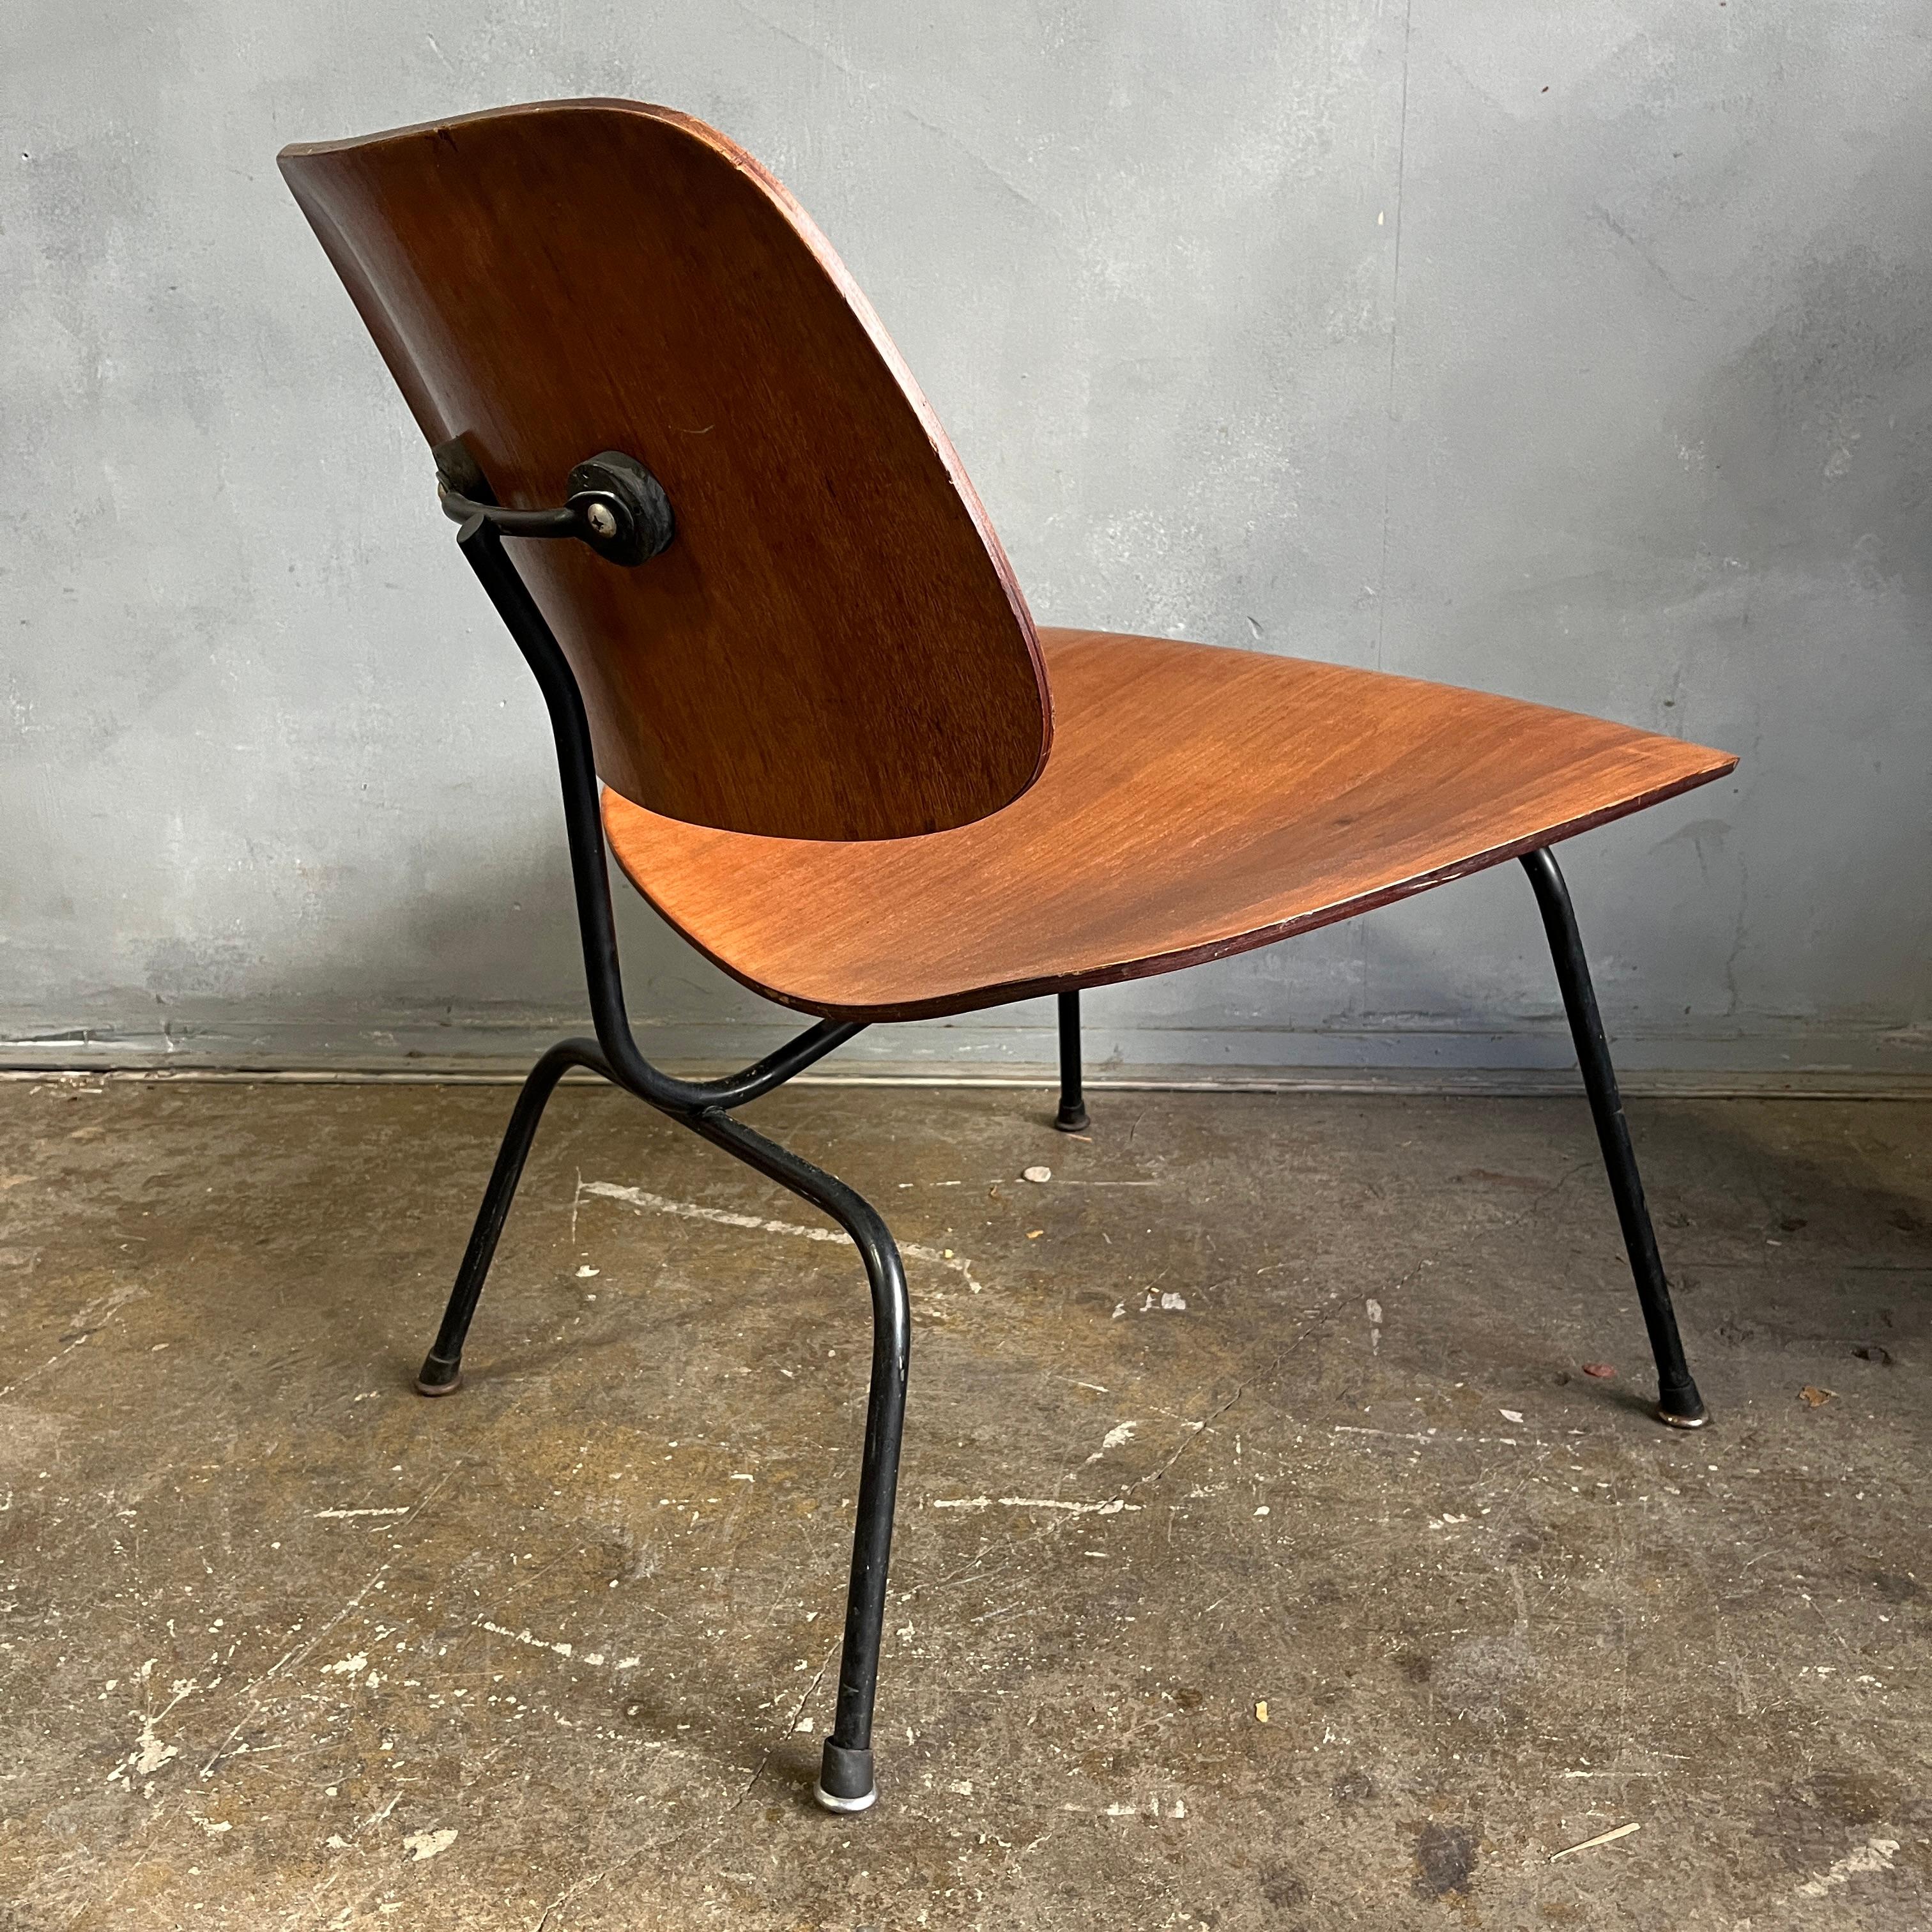 Metal Midcentury Authentic Eames LCM Lounge Chair in Walnut